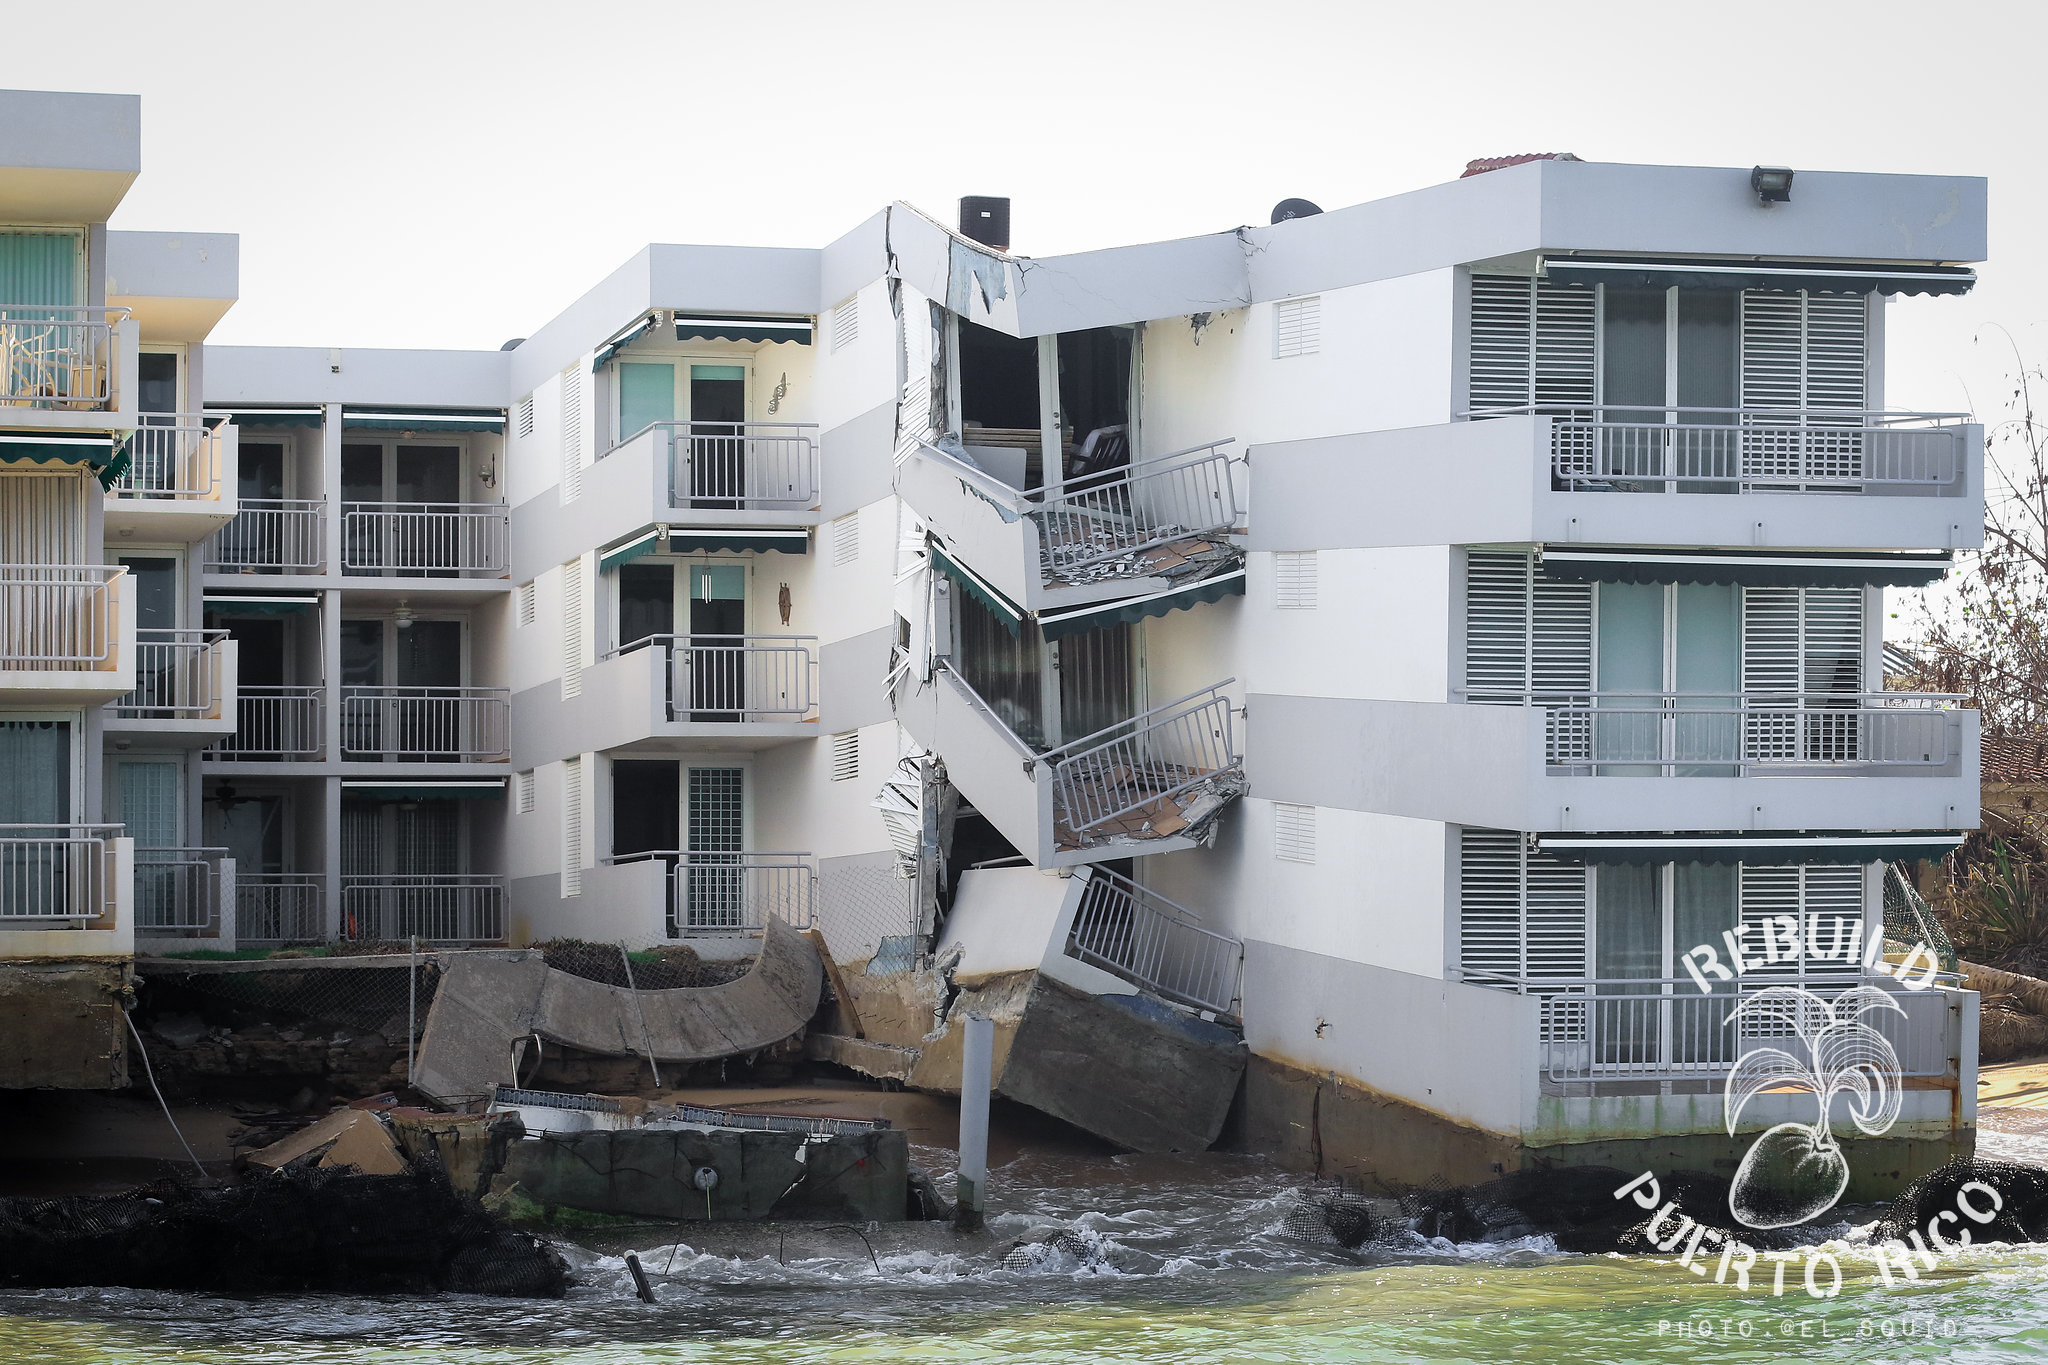 Concrete buildings collapsed as if an earthquake had shook the island. // Photo by Anthony Dooley